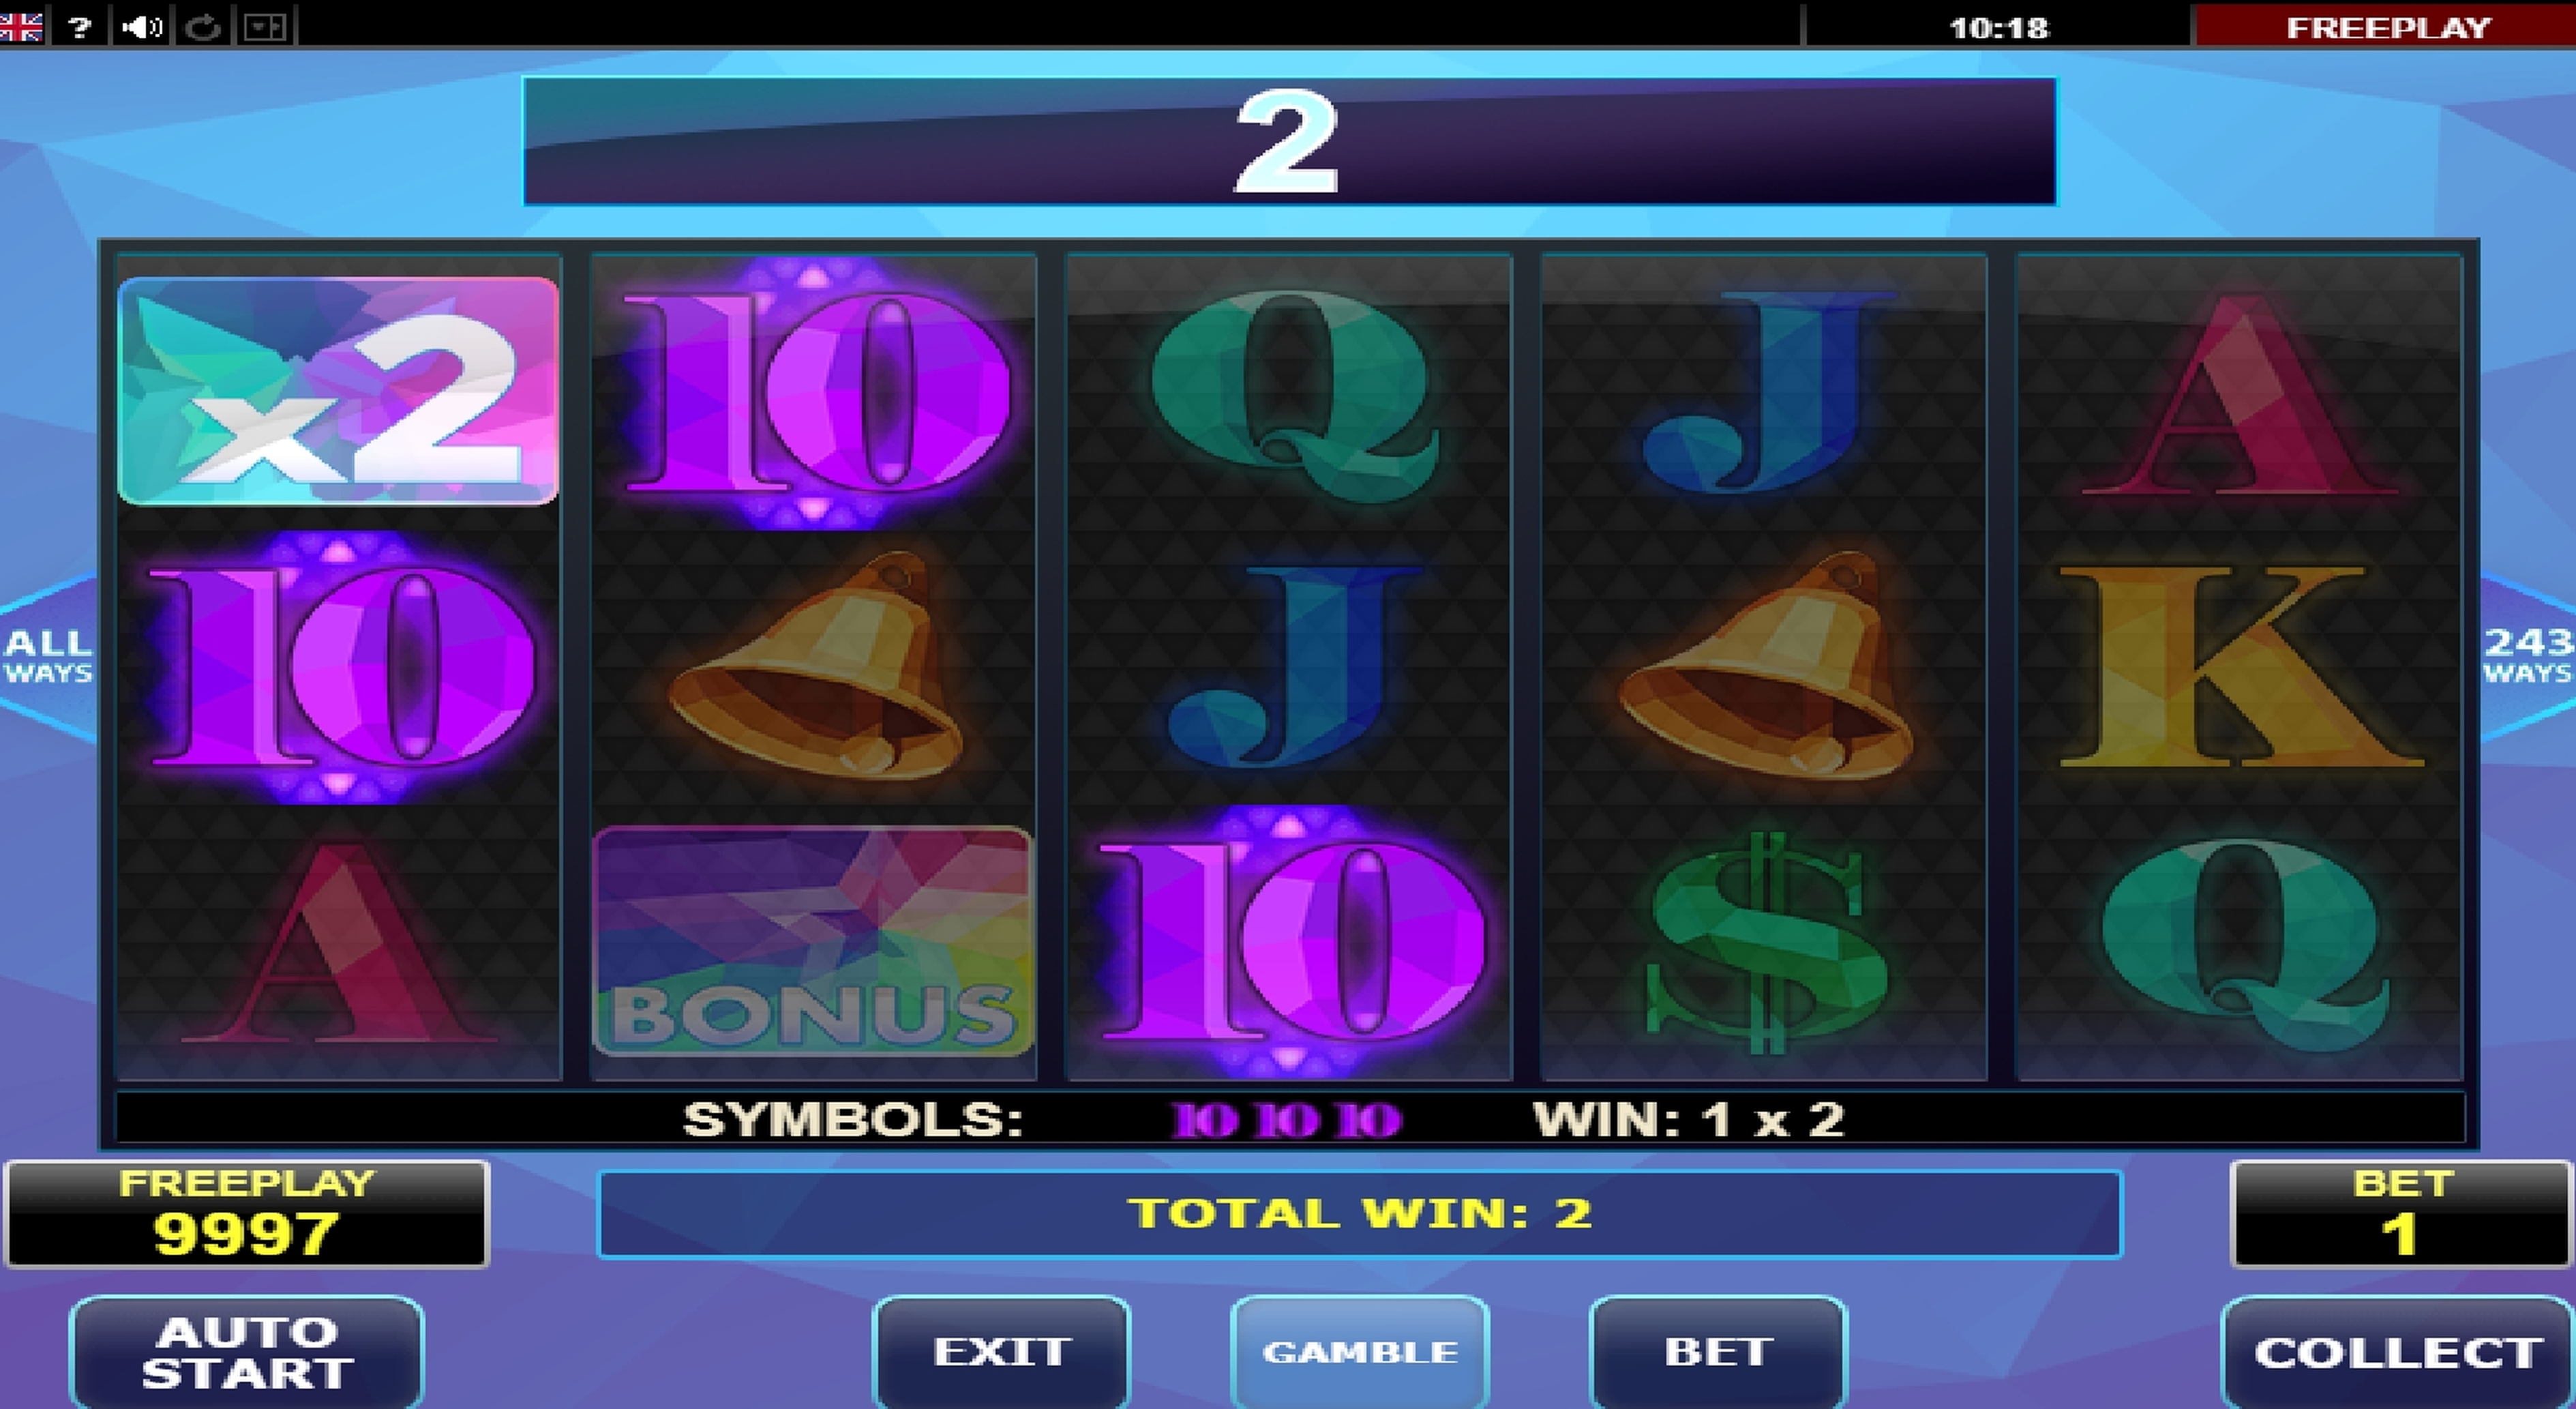 Win Money in All Ways Win Free Slot Game by Amatic Industries